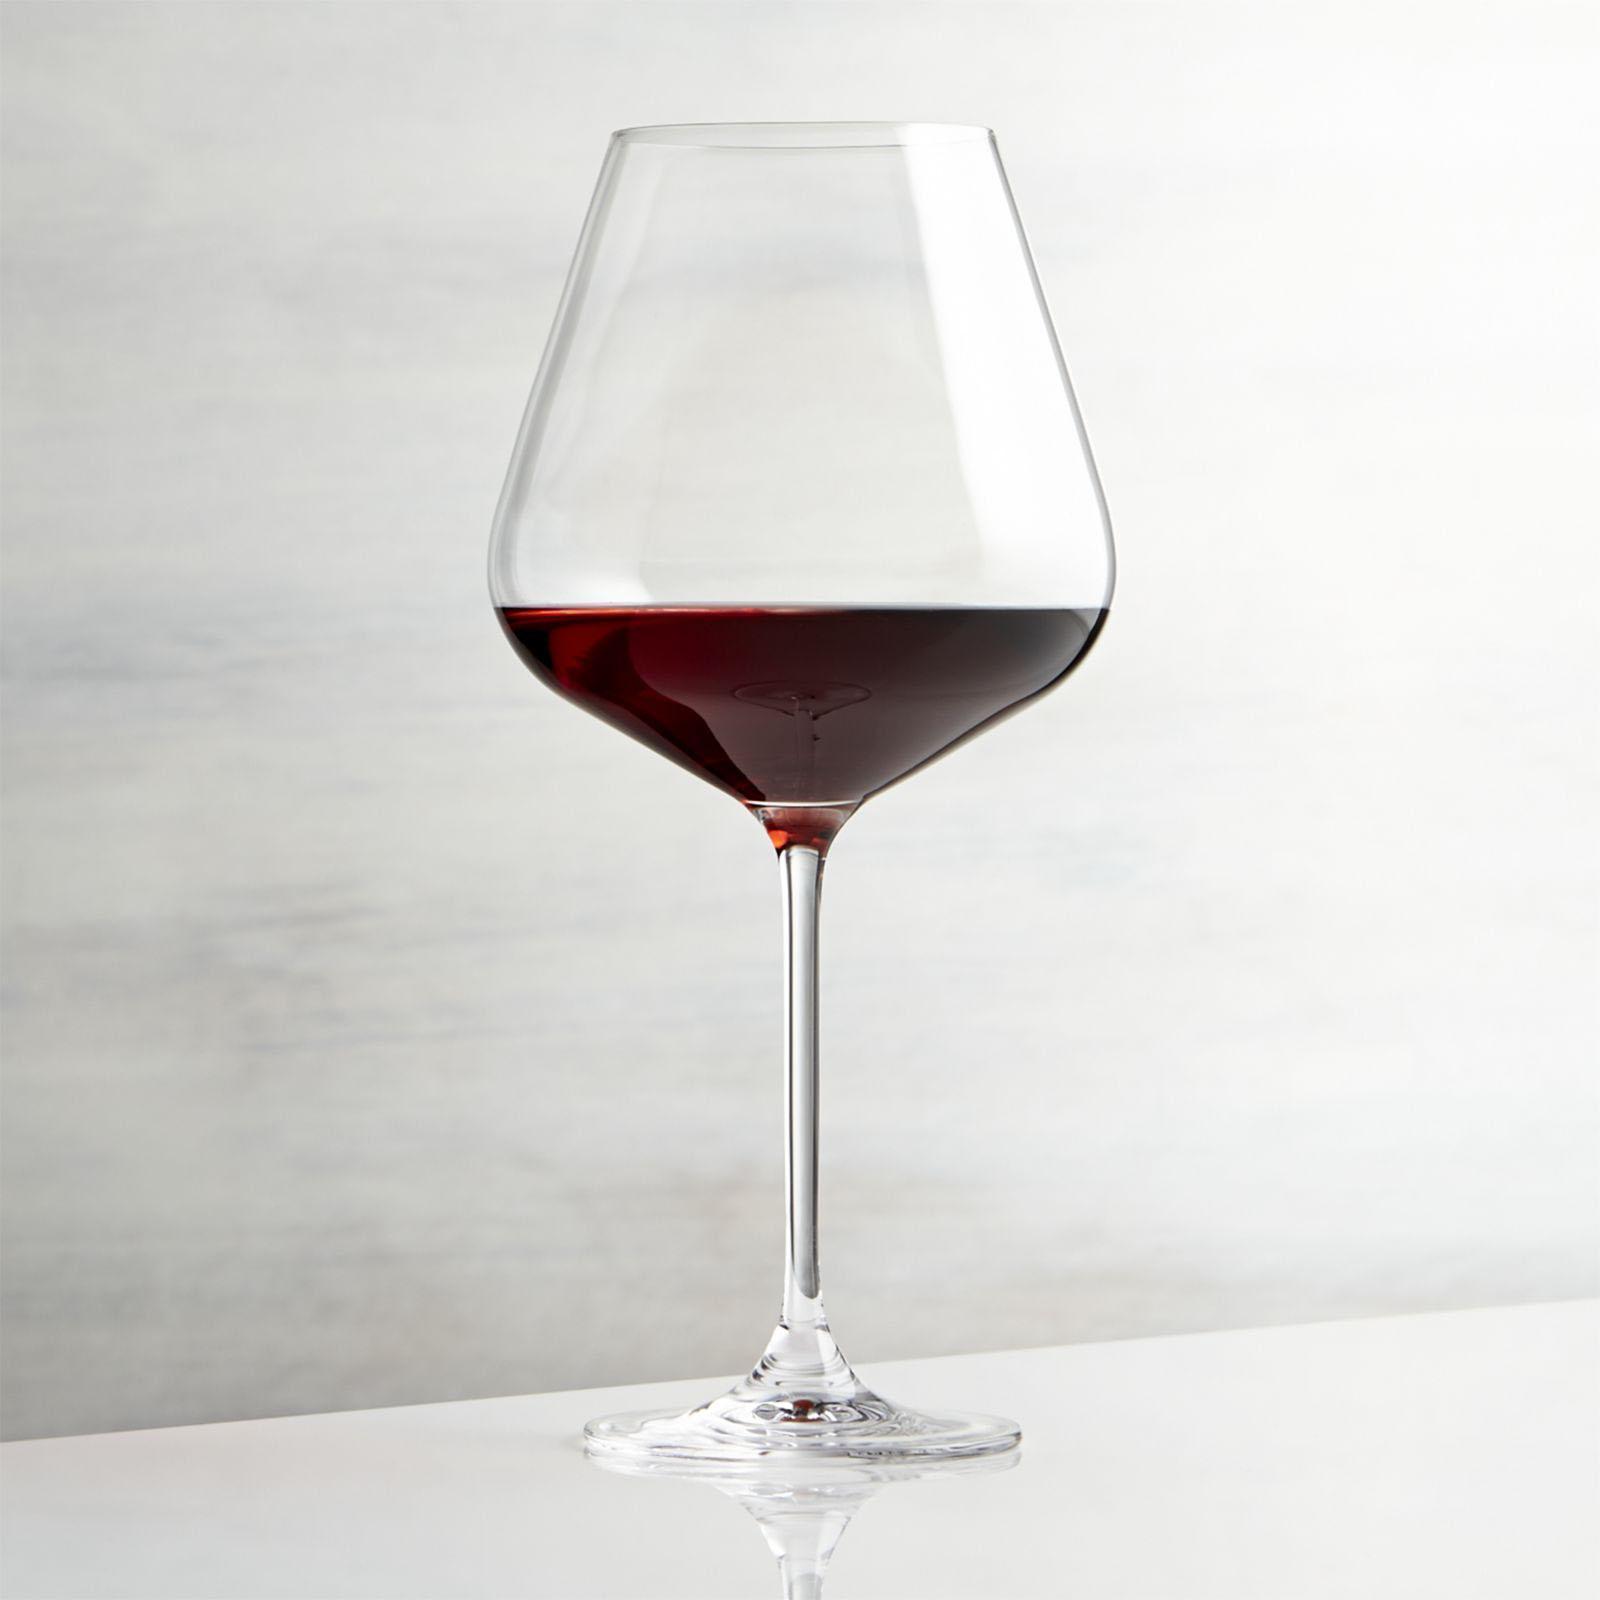 Why Are Red Wine Glasses Bigger?